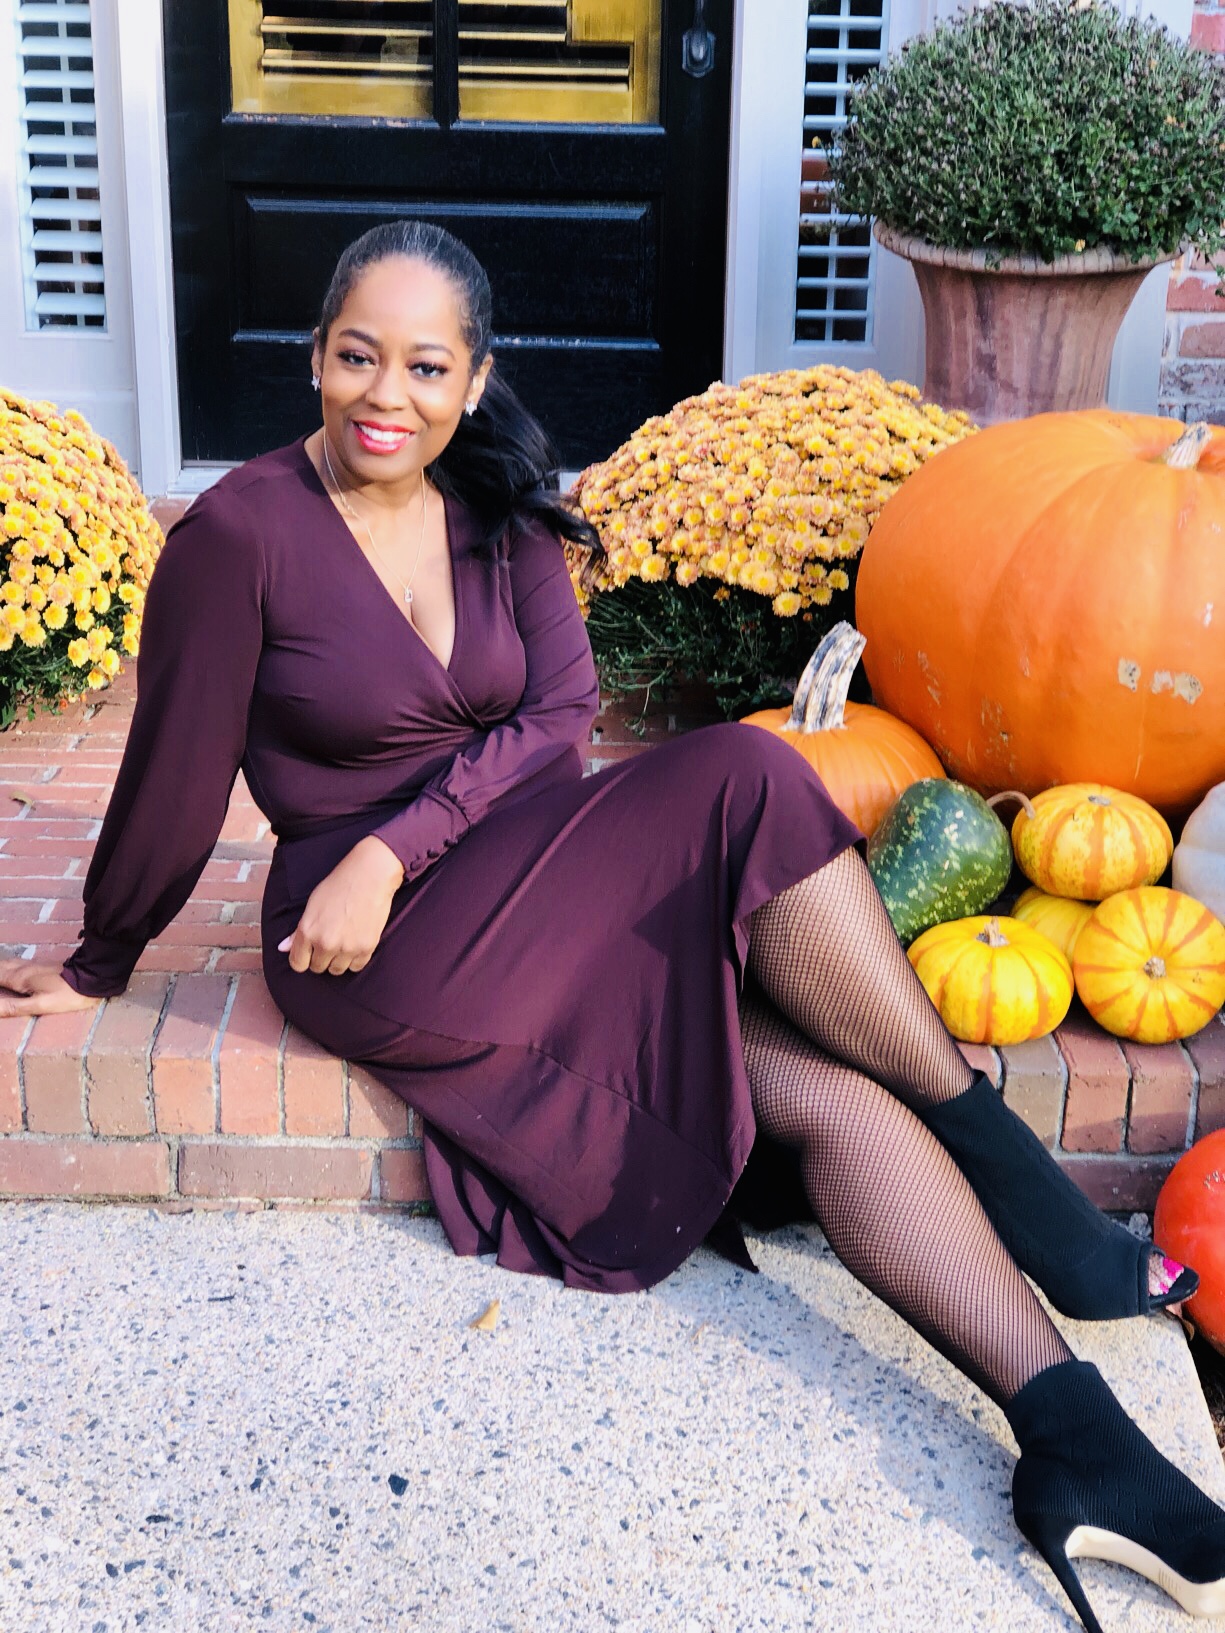 My Style: Thanksgiving Creped Wrap Dress